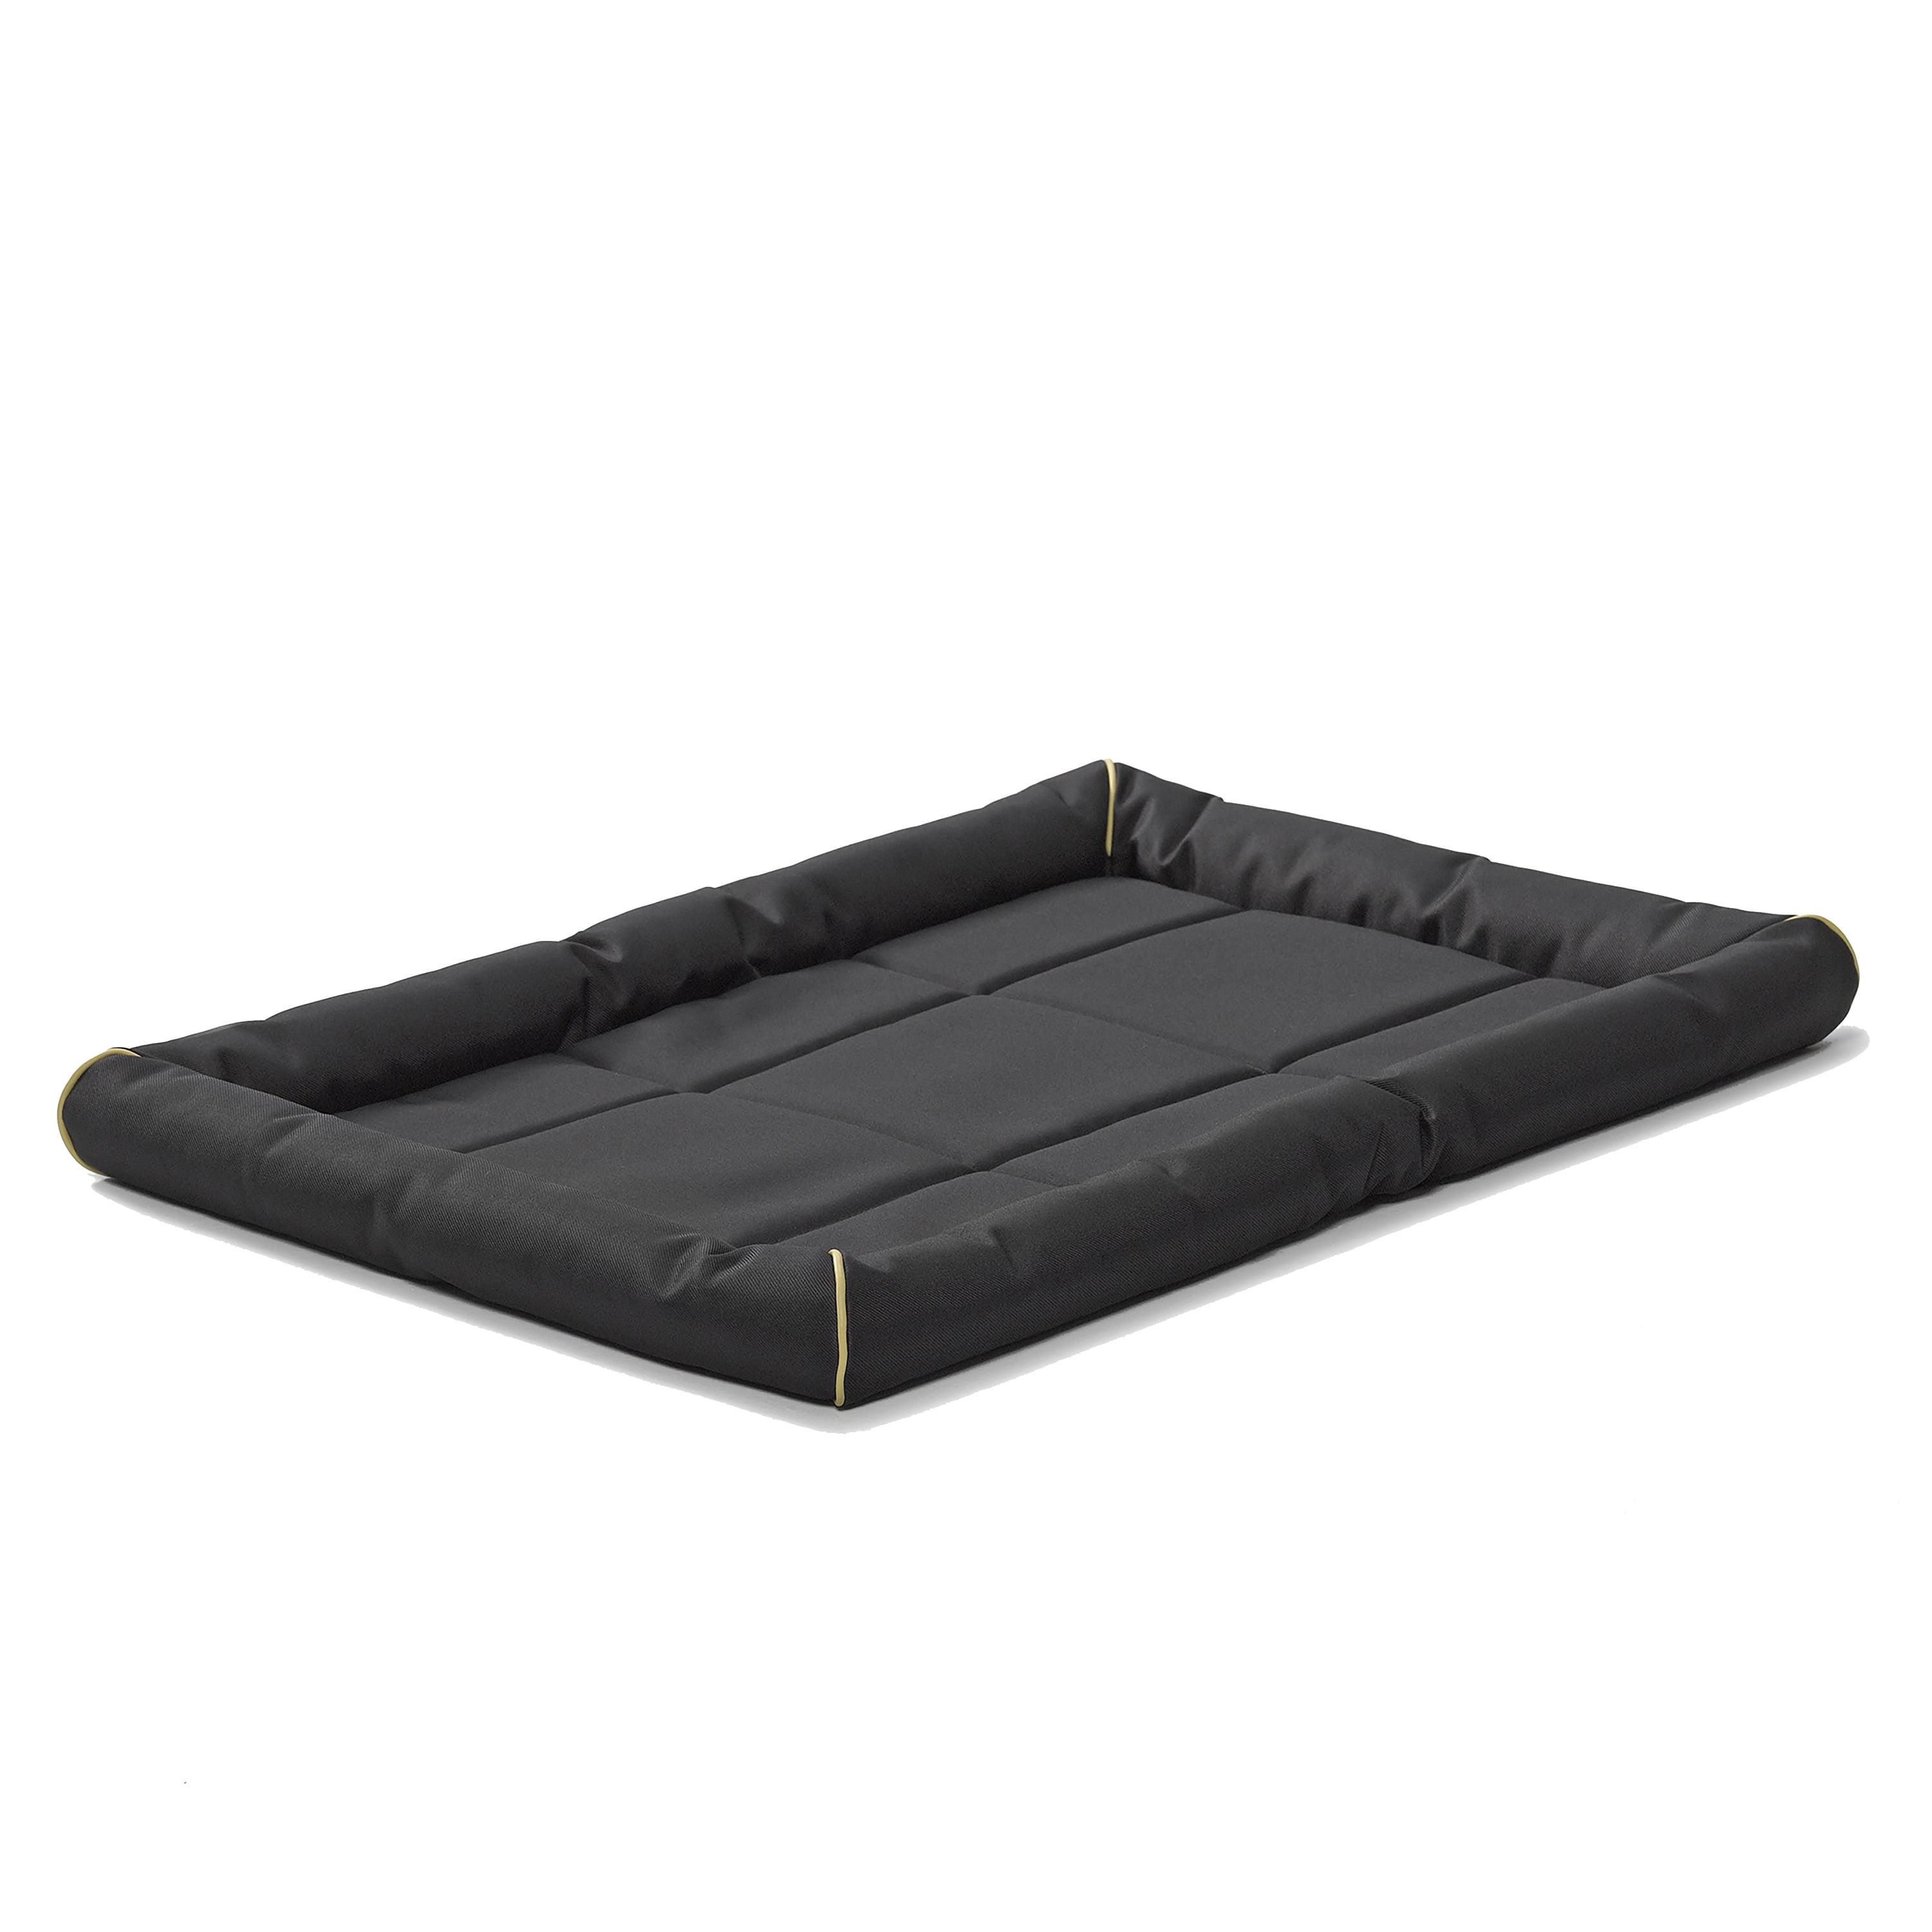 Photo 1 of MidWest Ultra-Durable Pet Bed, Black, 36-inch